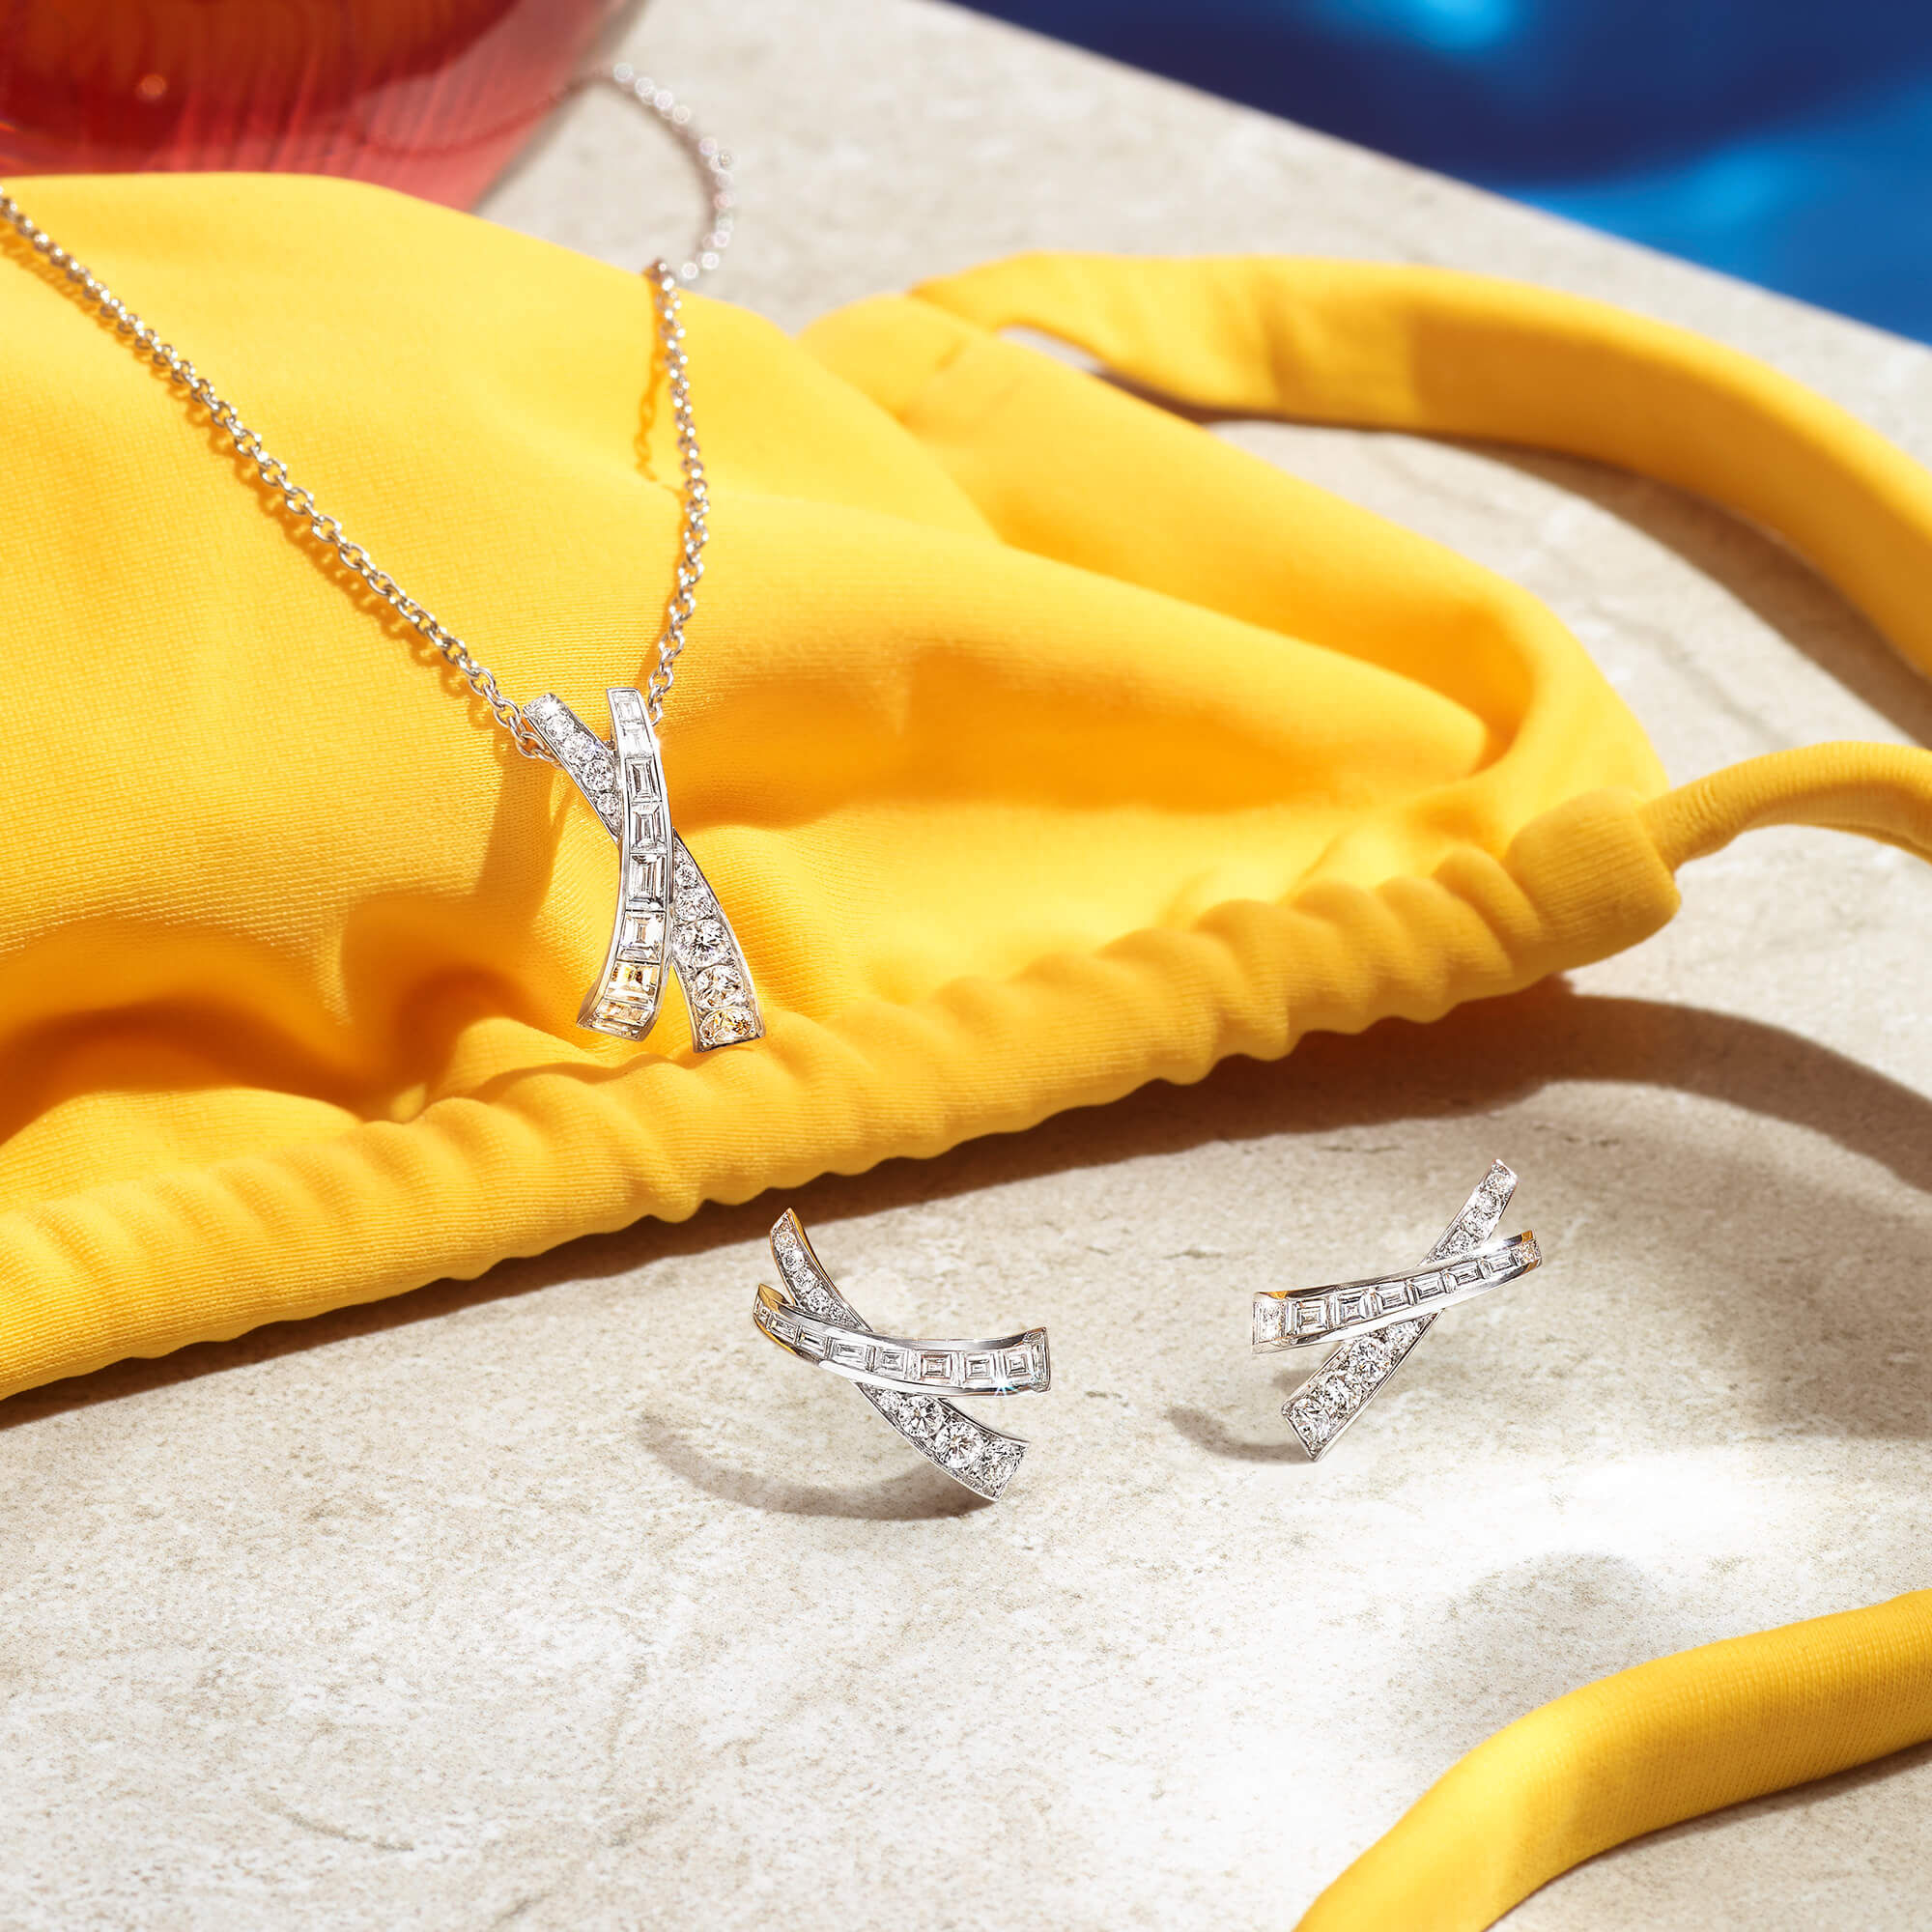 Close up of the Graff Kiss collection diamond earrings and pendant at a pool side